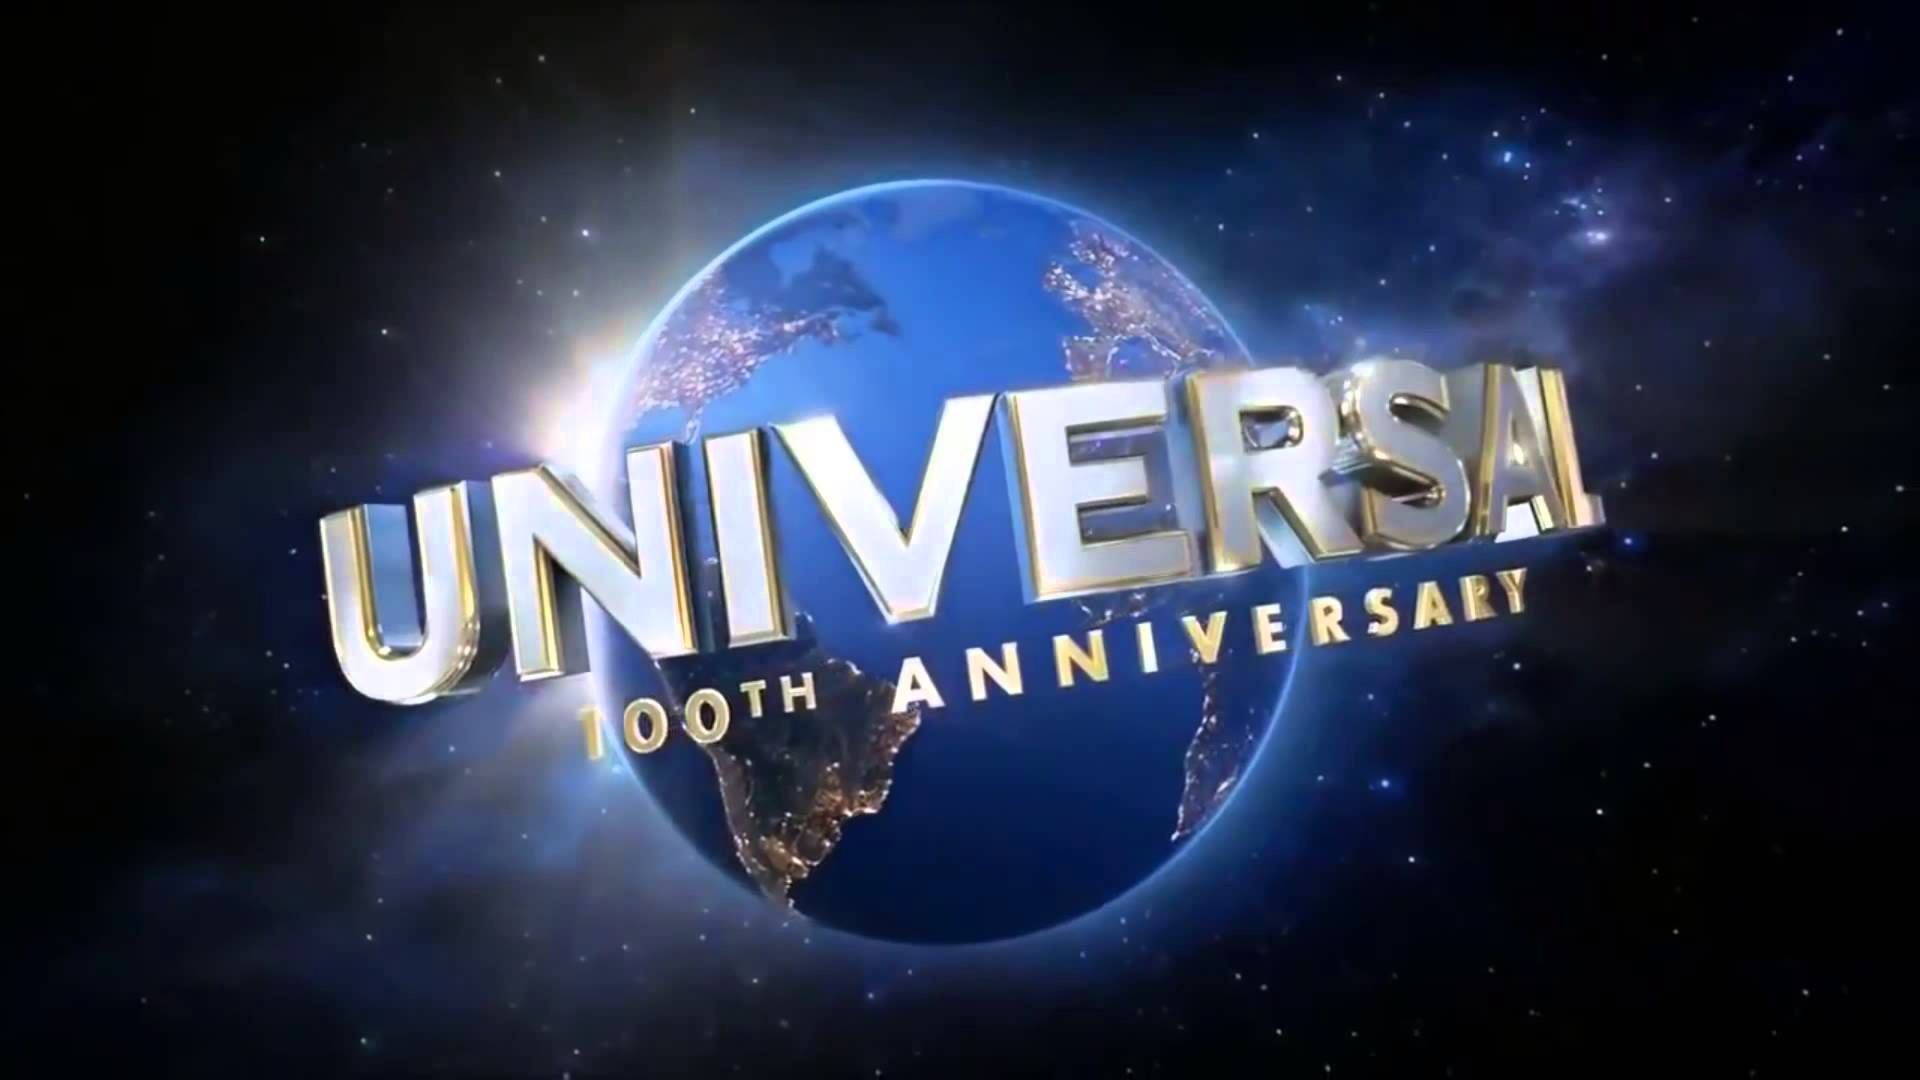 After Effect Free Project, Universal studios. Full movies, Full movies online, Universal picture